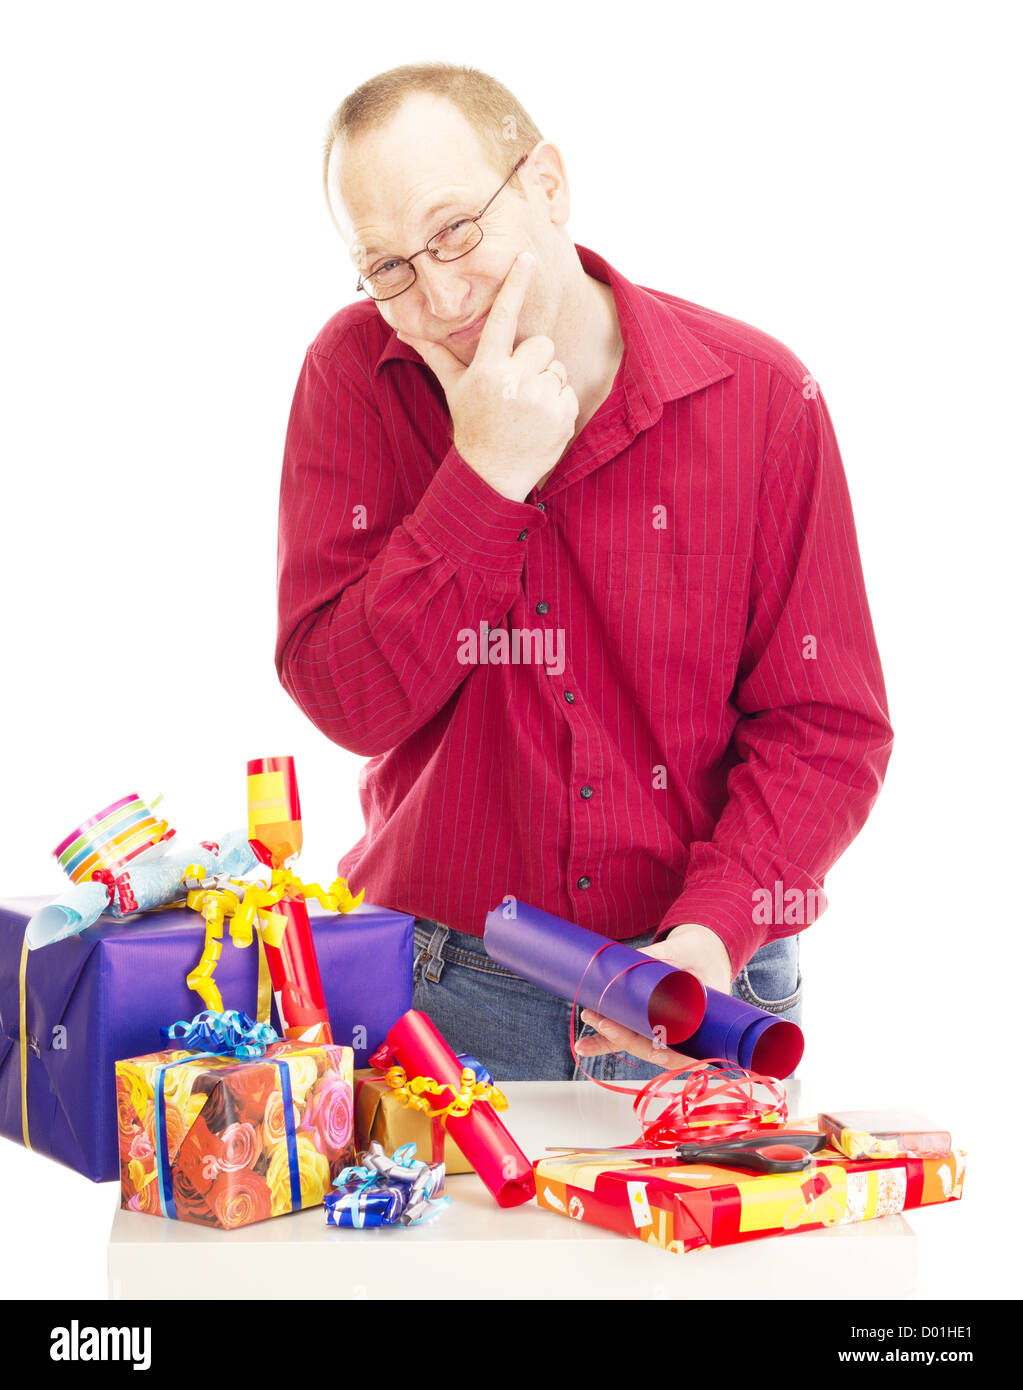 Person packaging some colorful gifts Stock Photo